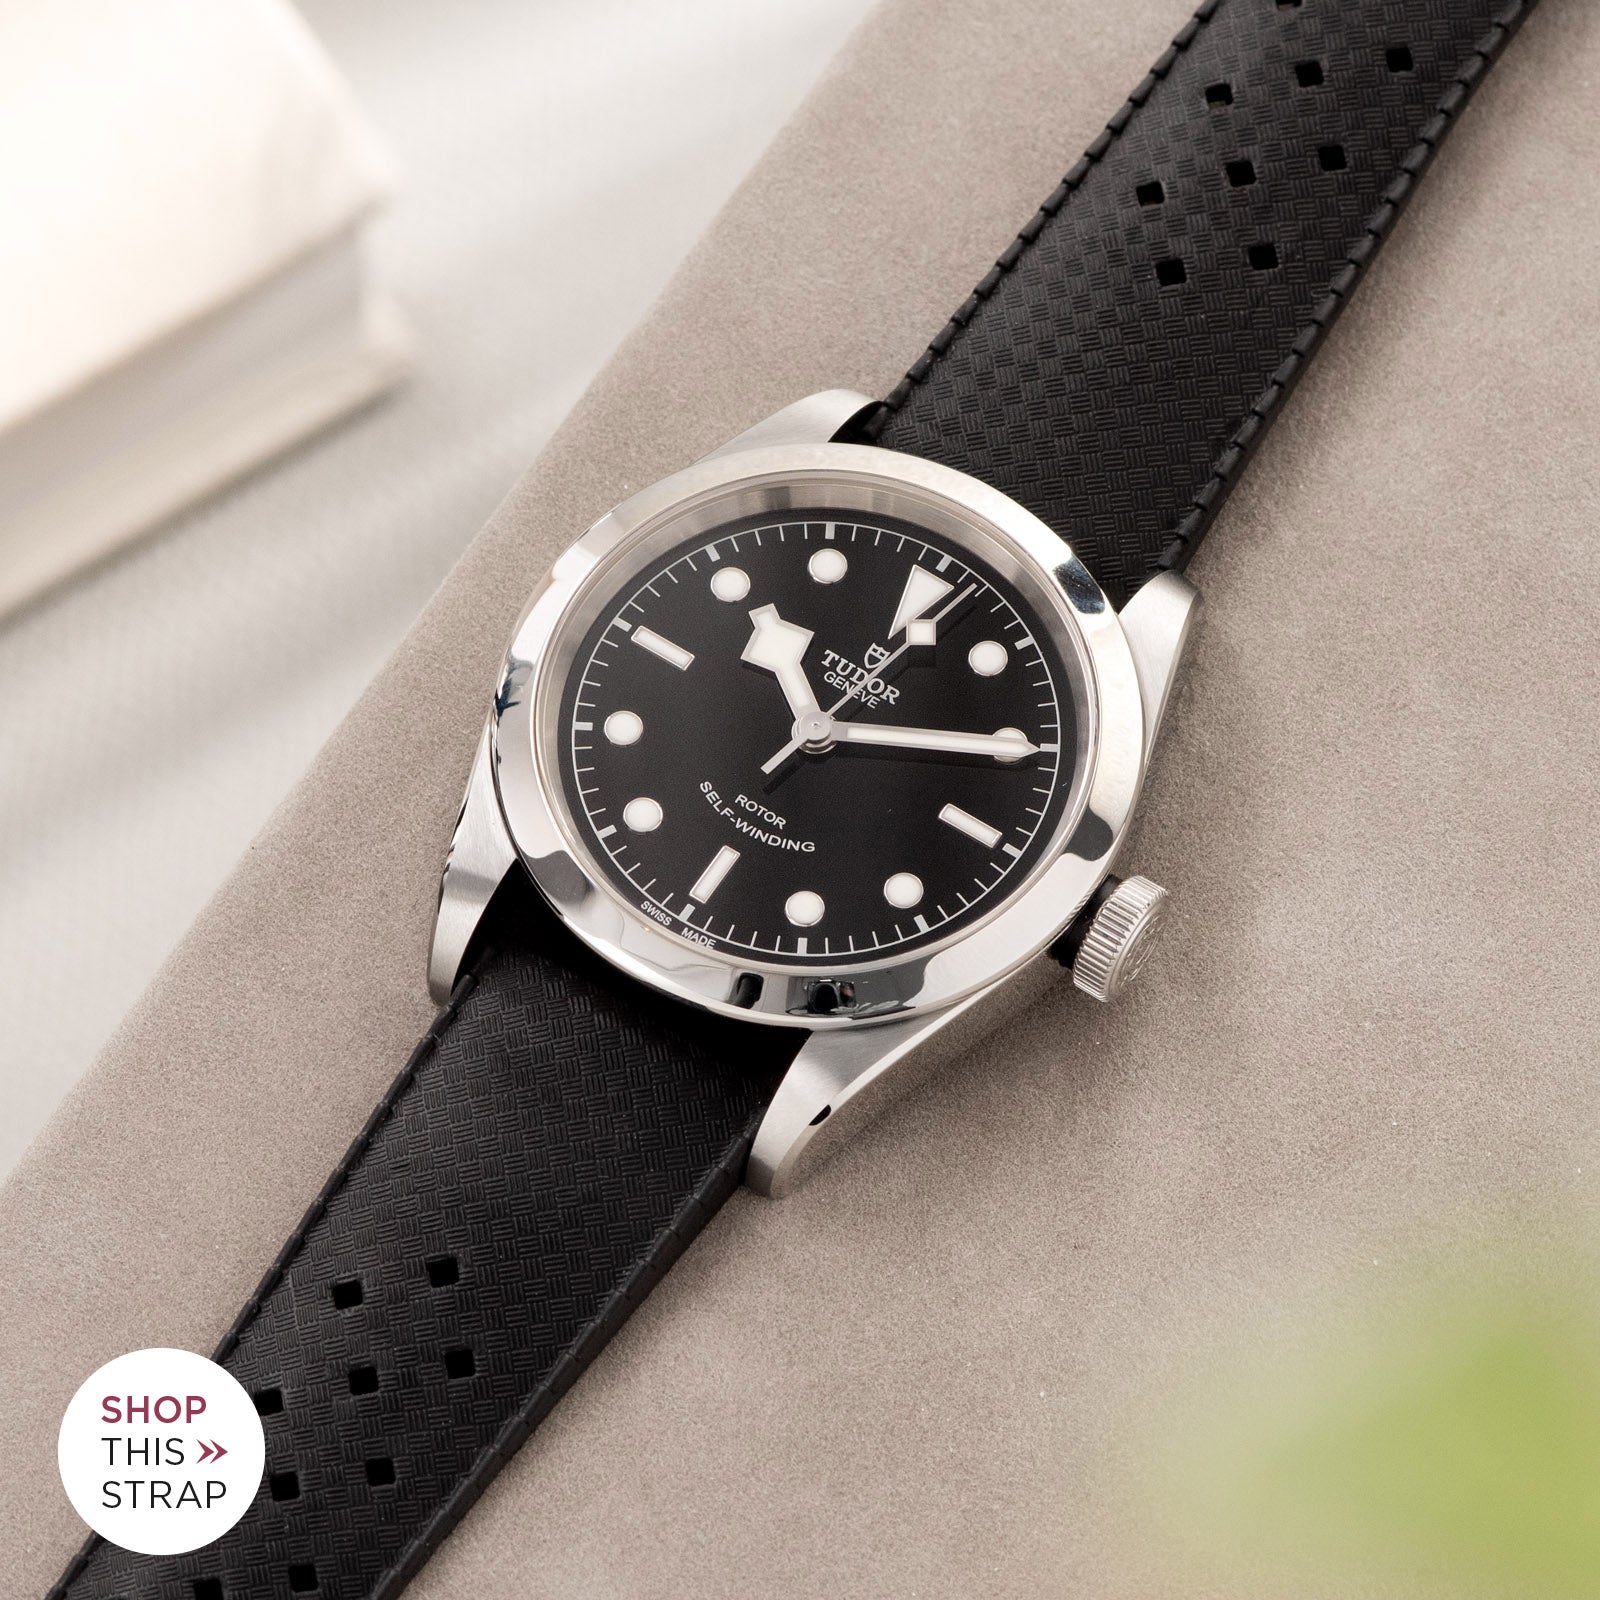 Bulang and Sons_Strap Guide_The Tudor Black Bay 41_Nautic Basket Weave Black Rubber Style Watch Strap